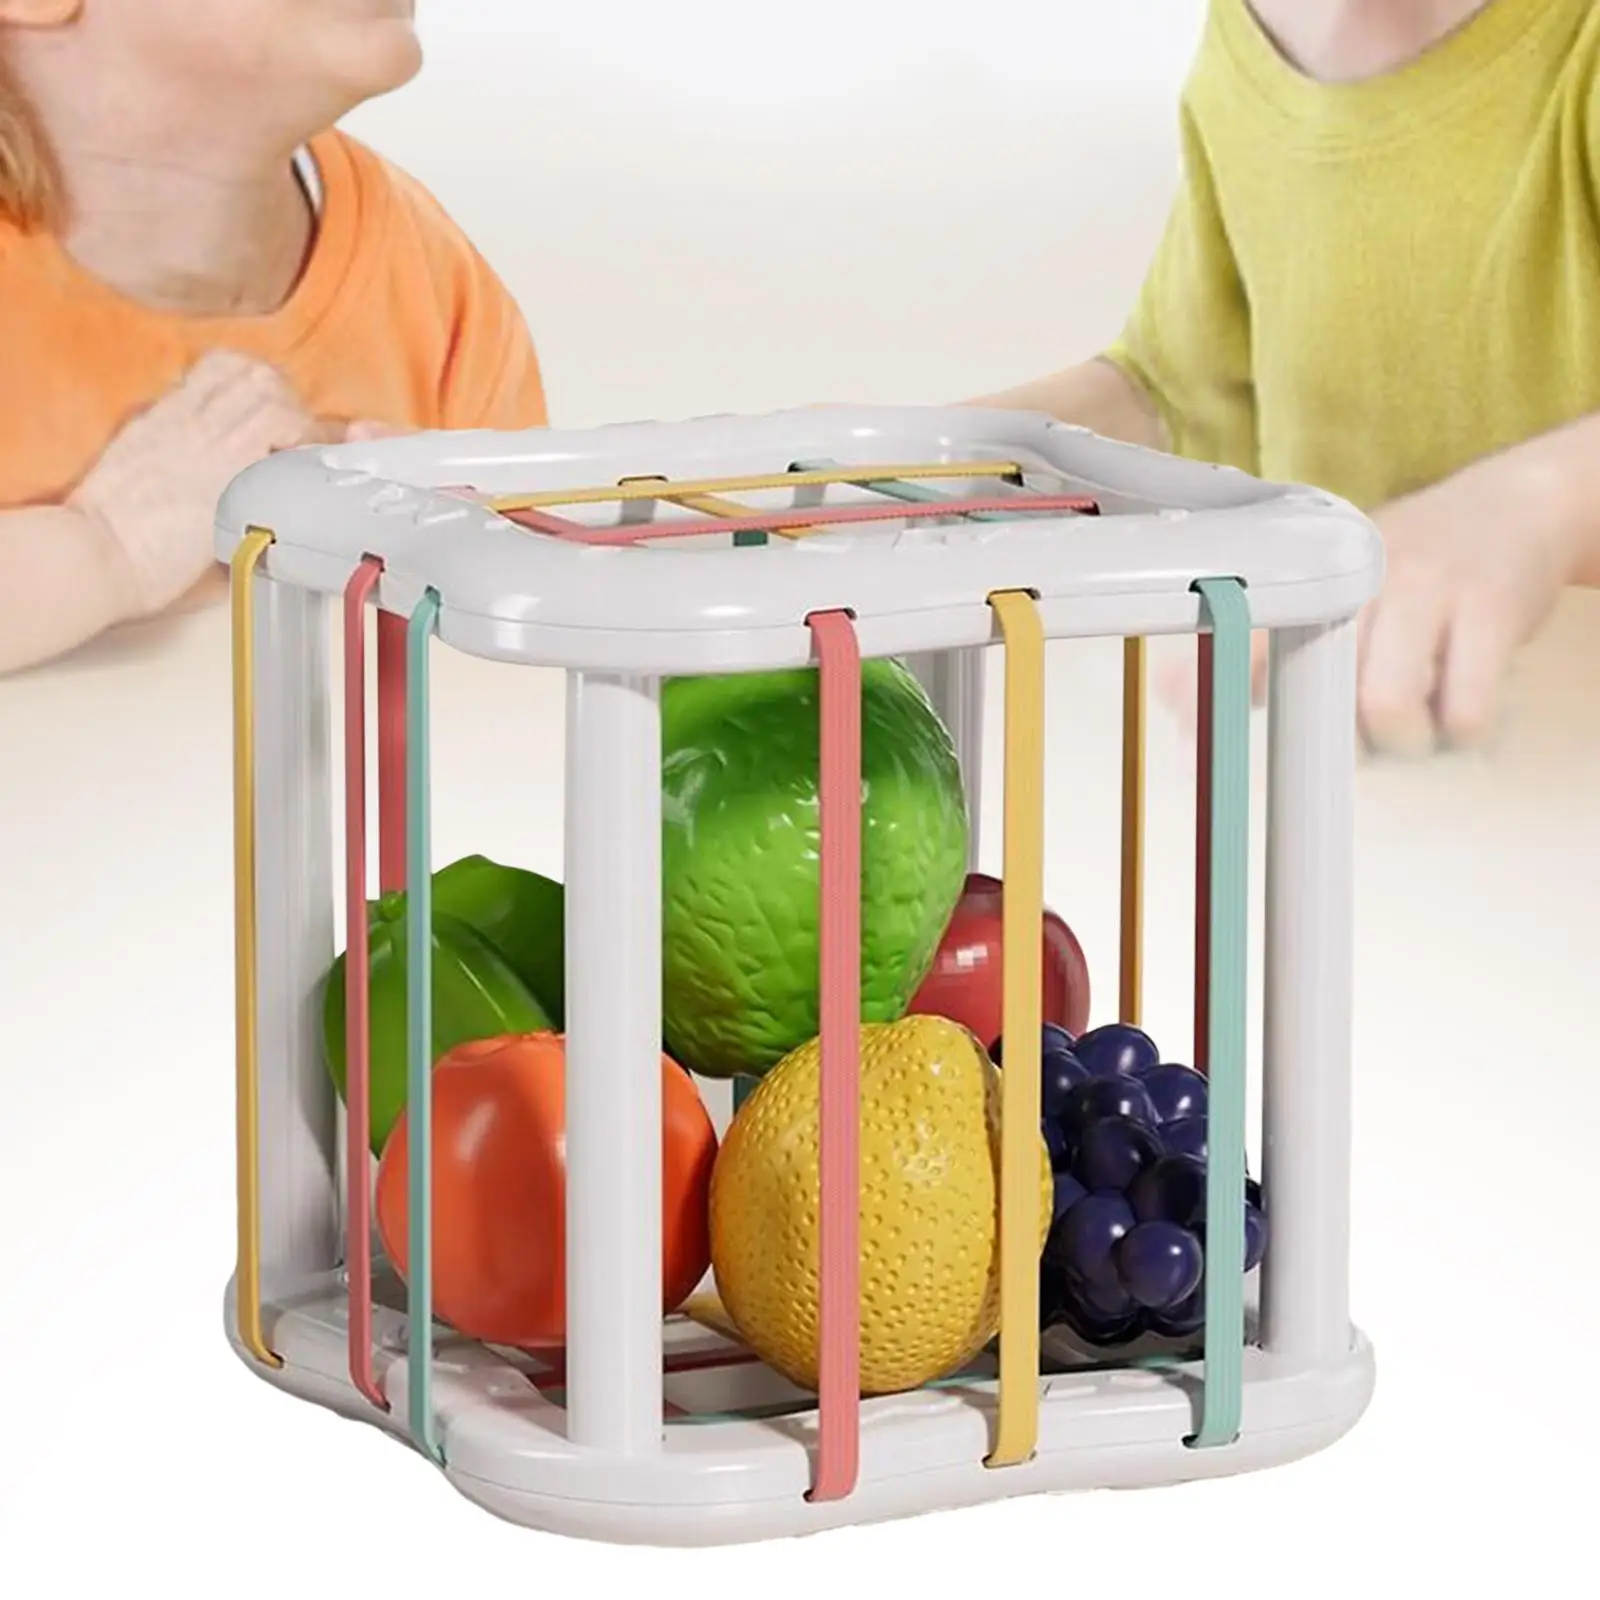 Storage Cube Bin Montessori Toys Educational Toys Cube Sensory Sorting Baby Toy for Children Age 1 2 3 Toddlers Holiday Gifts